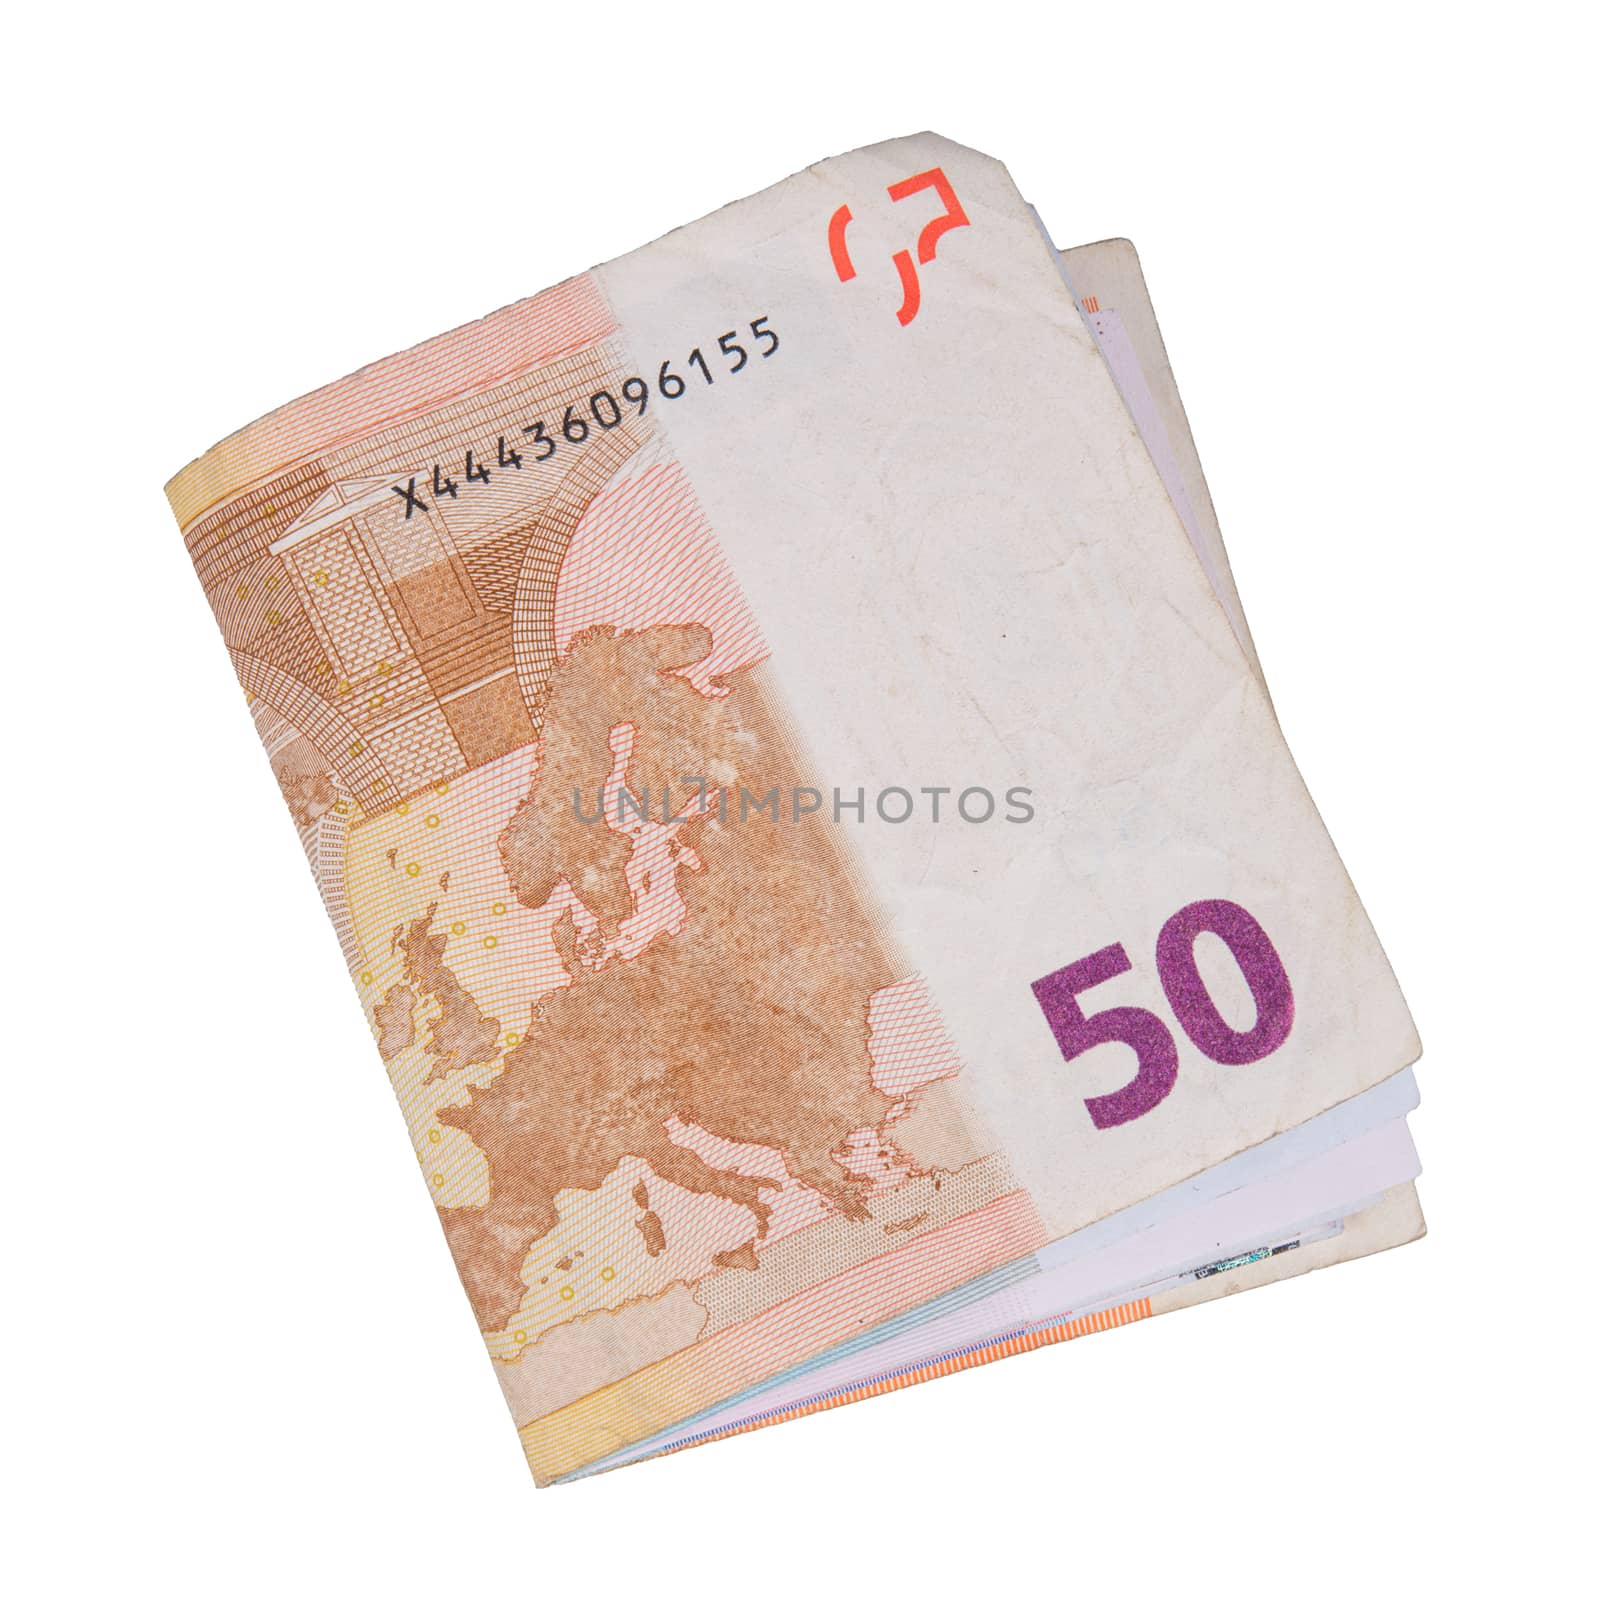 Fifty euro banknote isolate on a white background